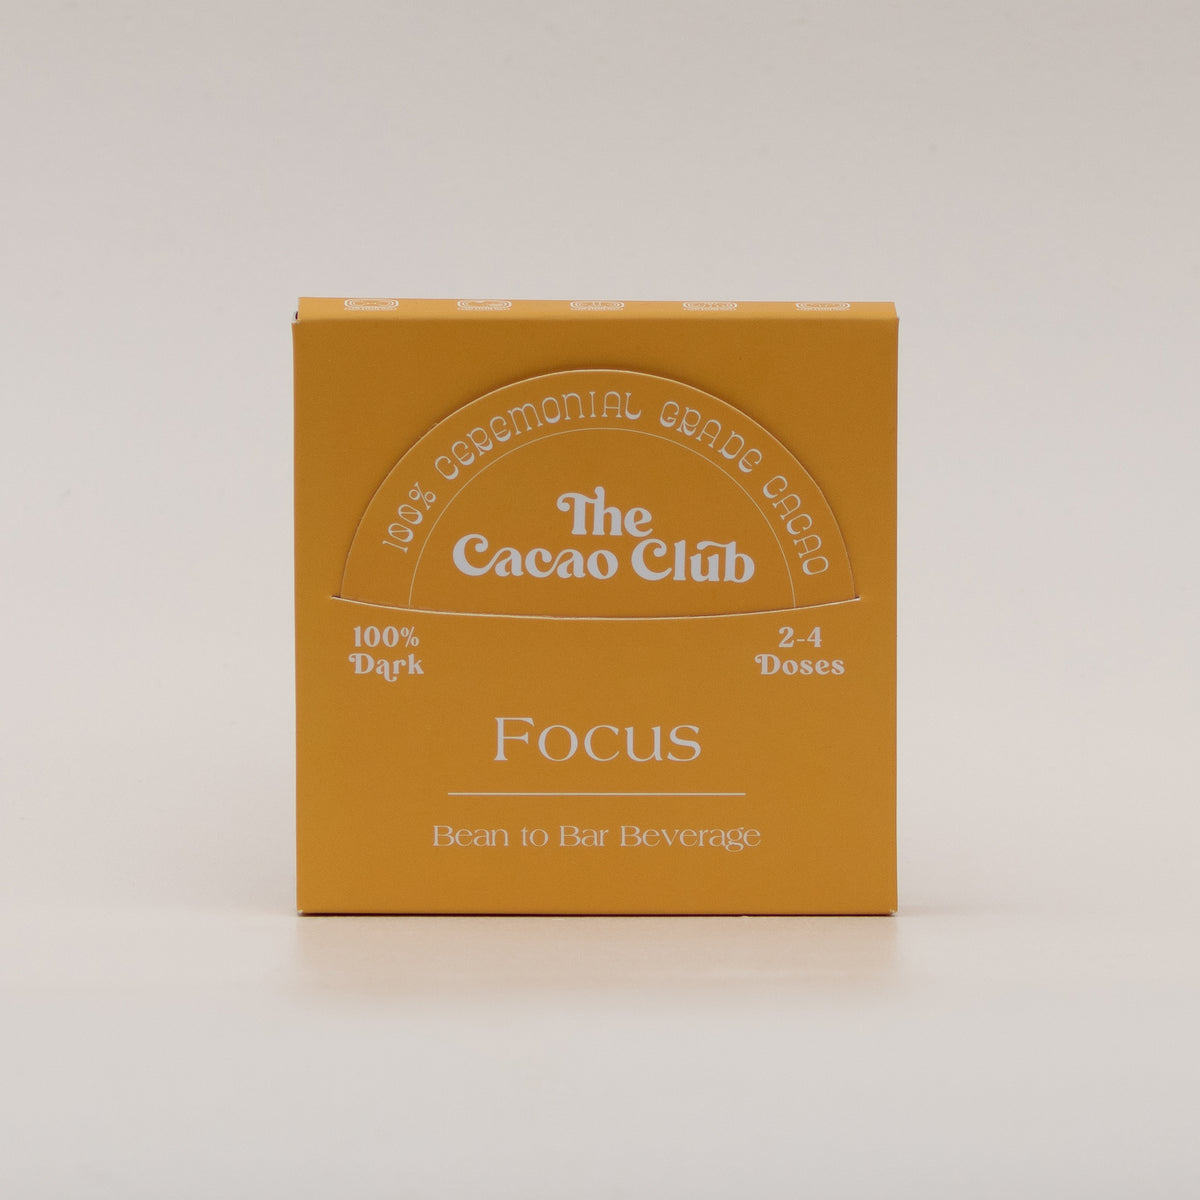 Ceremonial Cacao Focus Blend (Hot Cacao Drink) by The Cacao Club